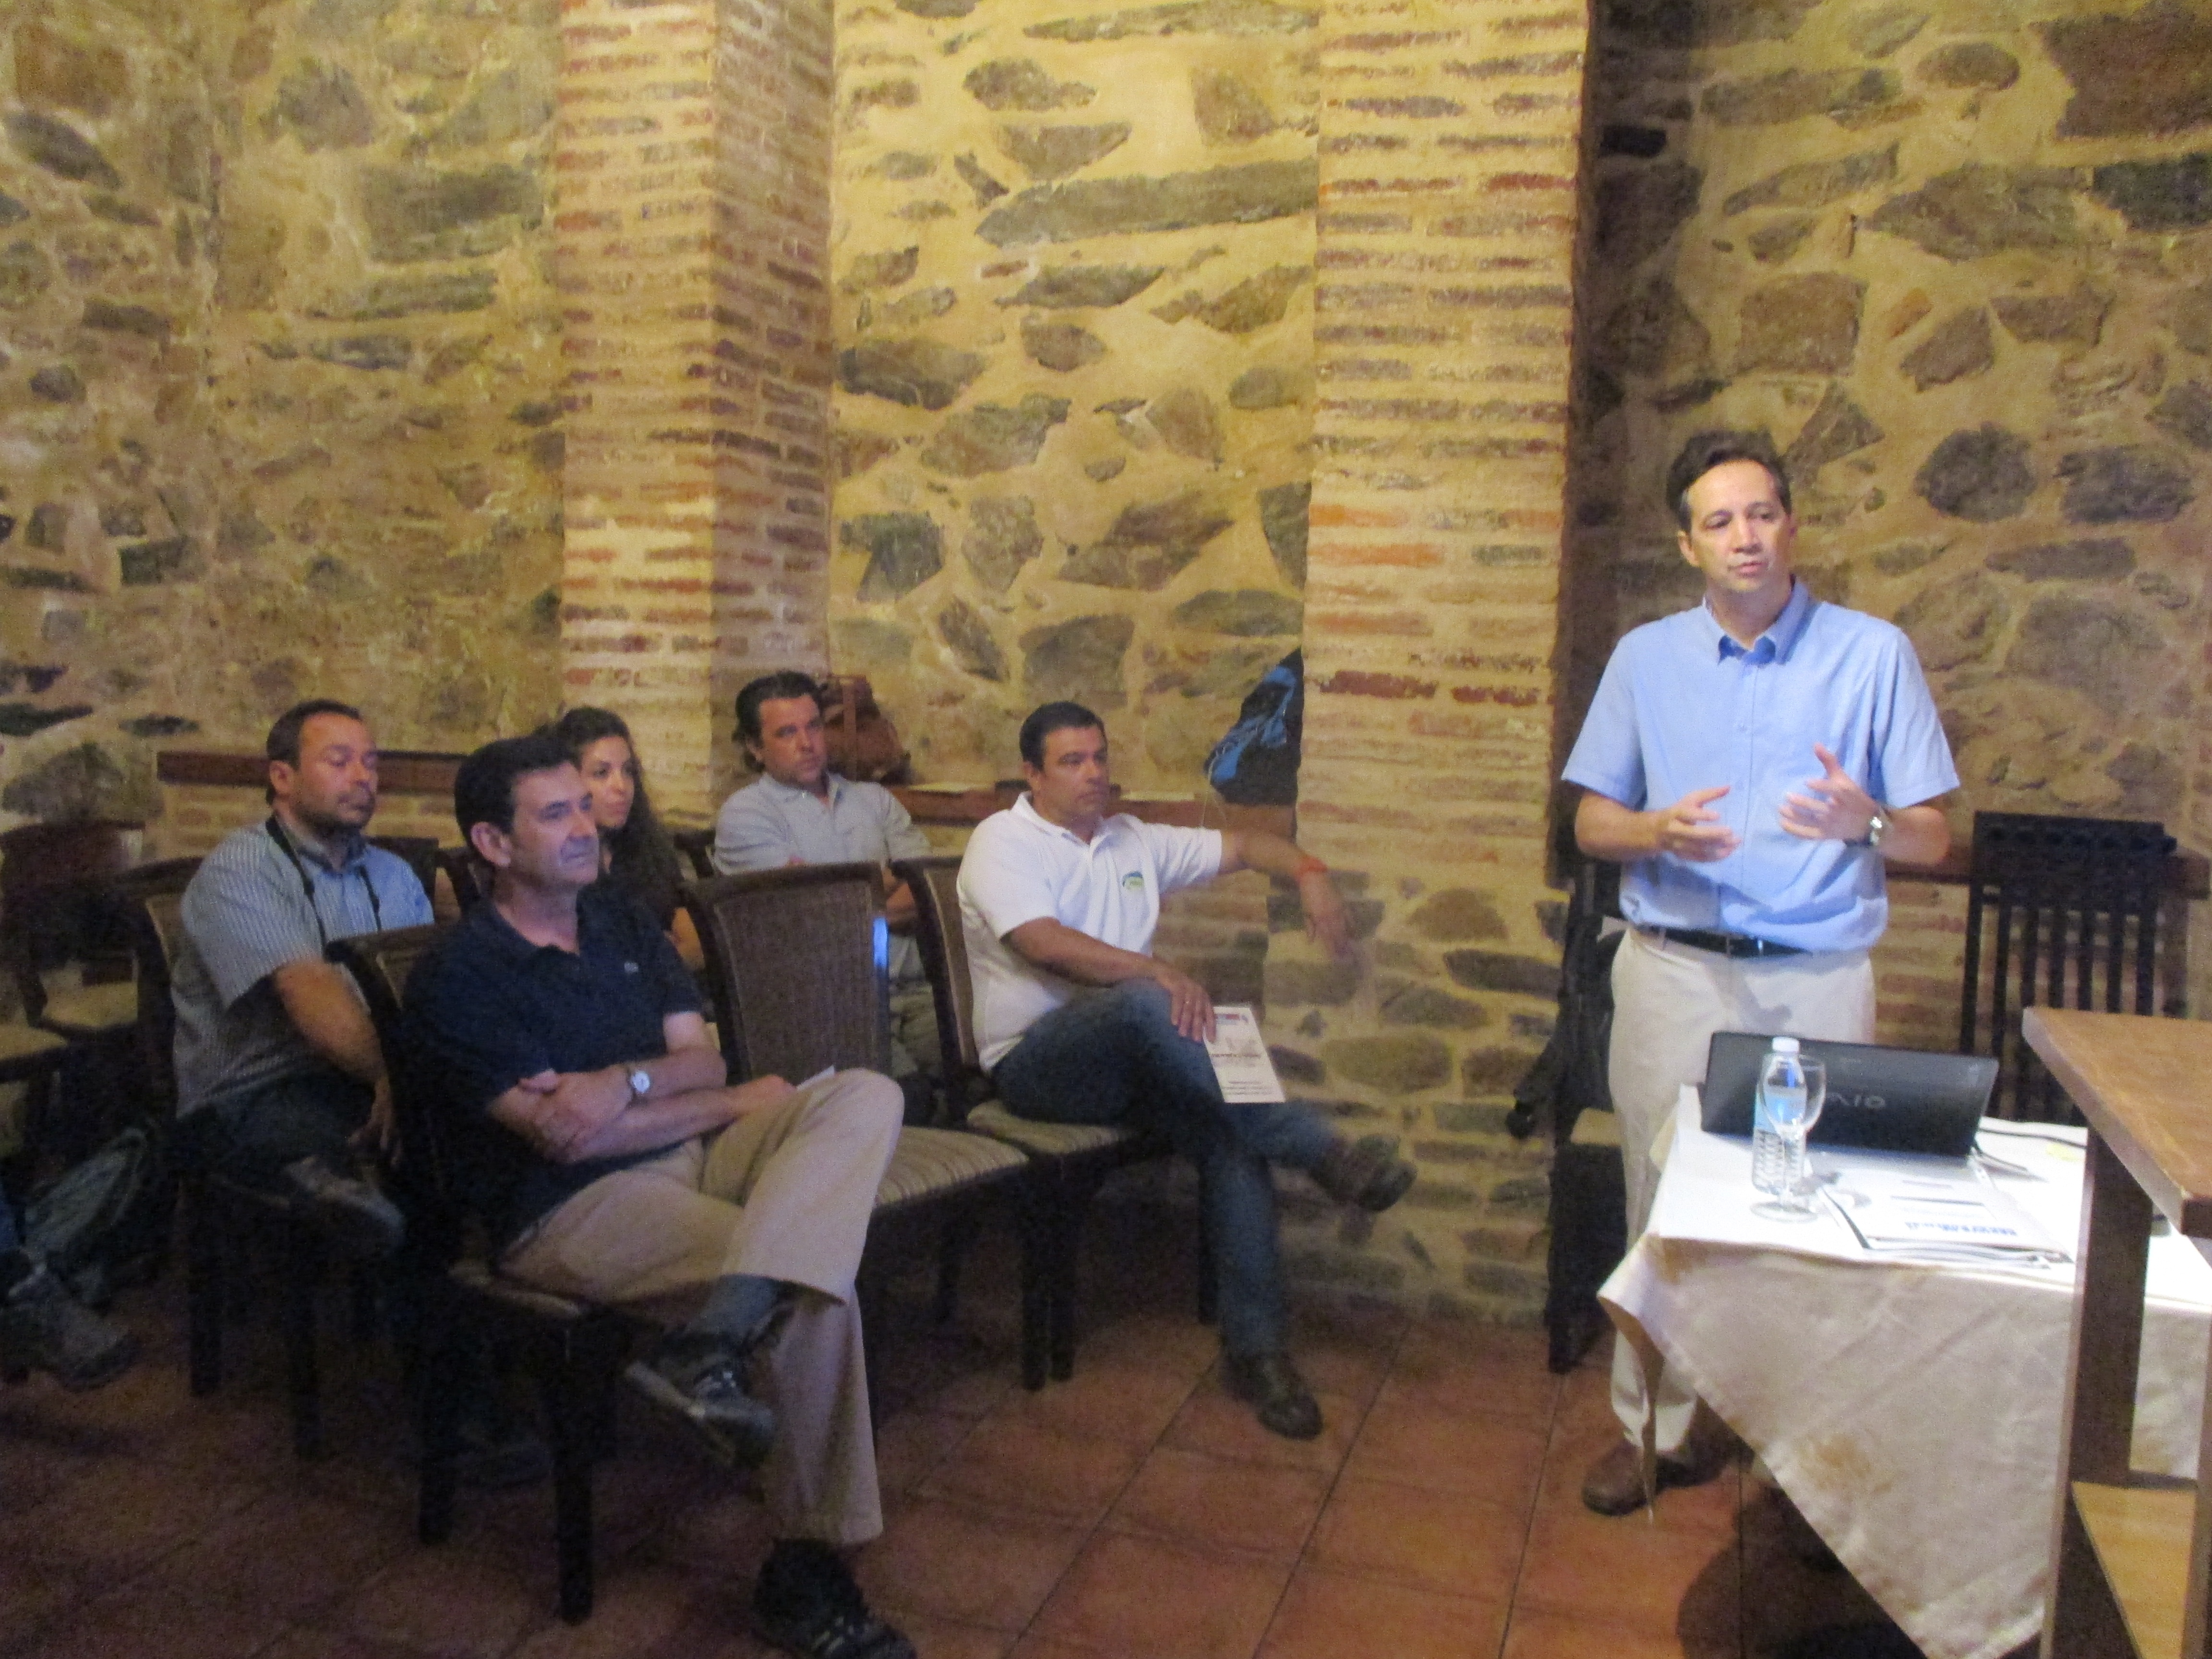 Symposium on civil engineering in Extremadura and historical hydraulic works in Guadalupe